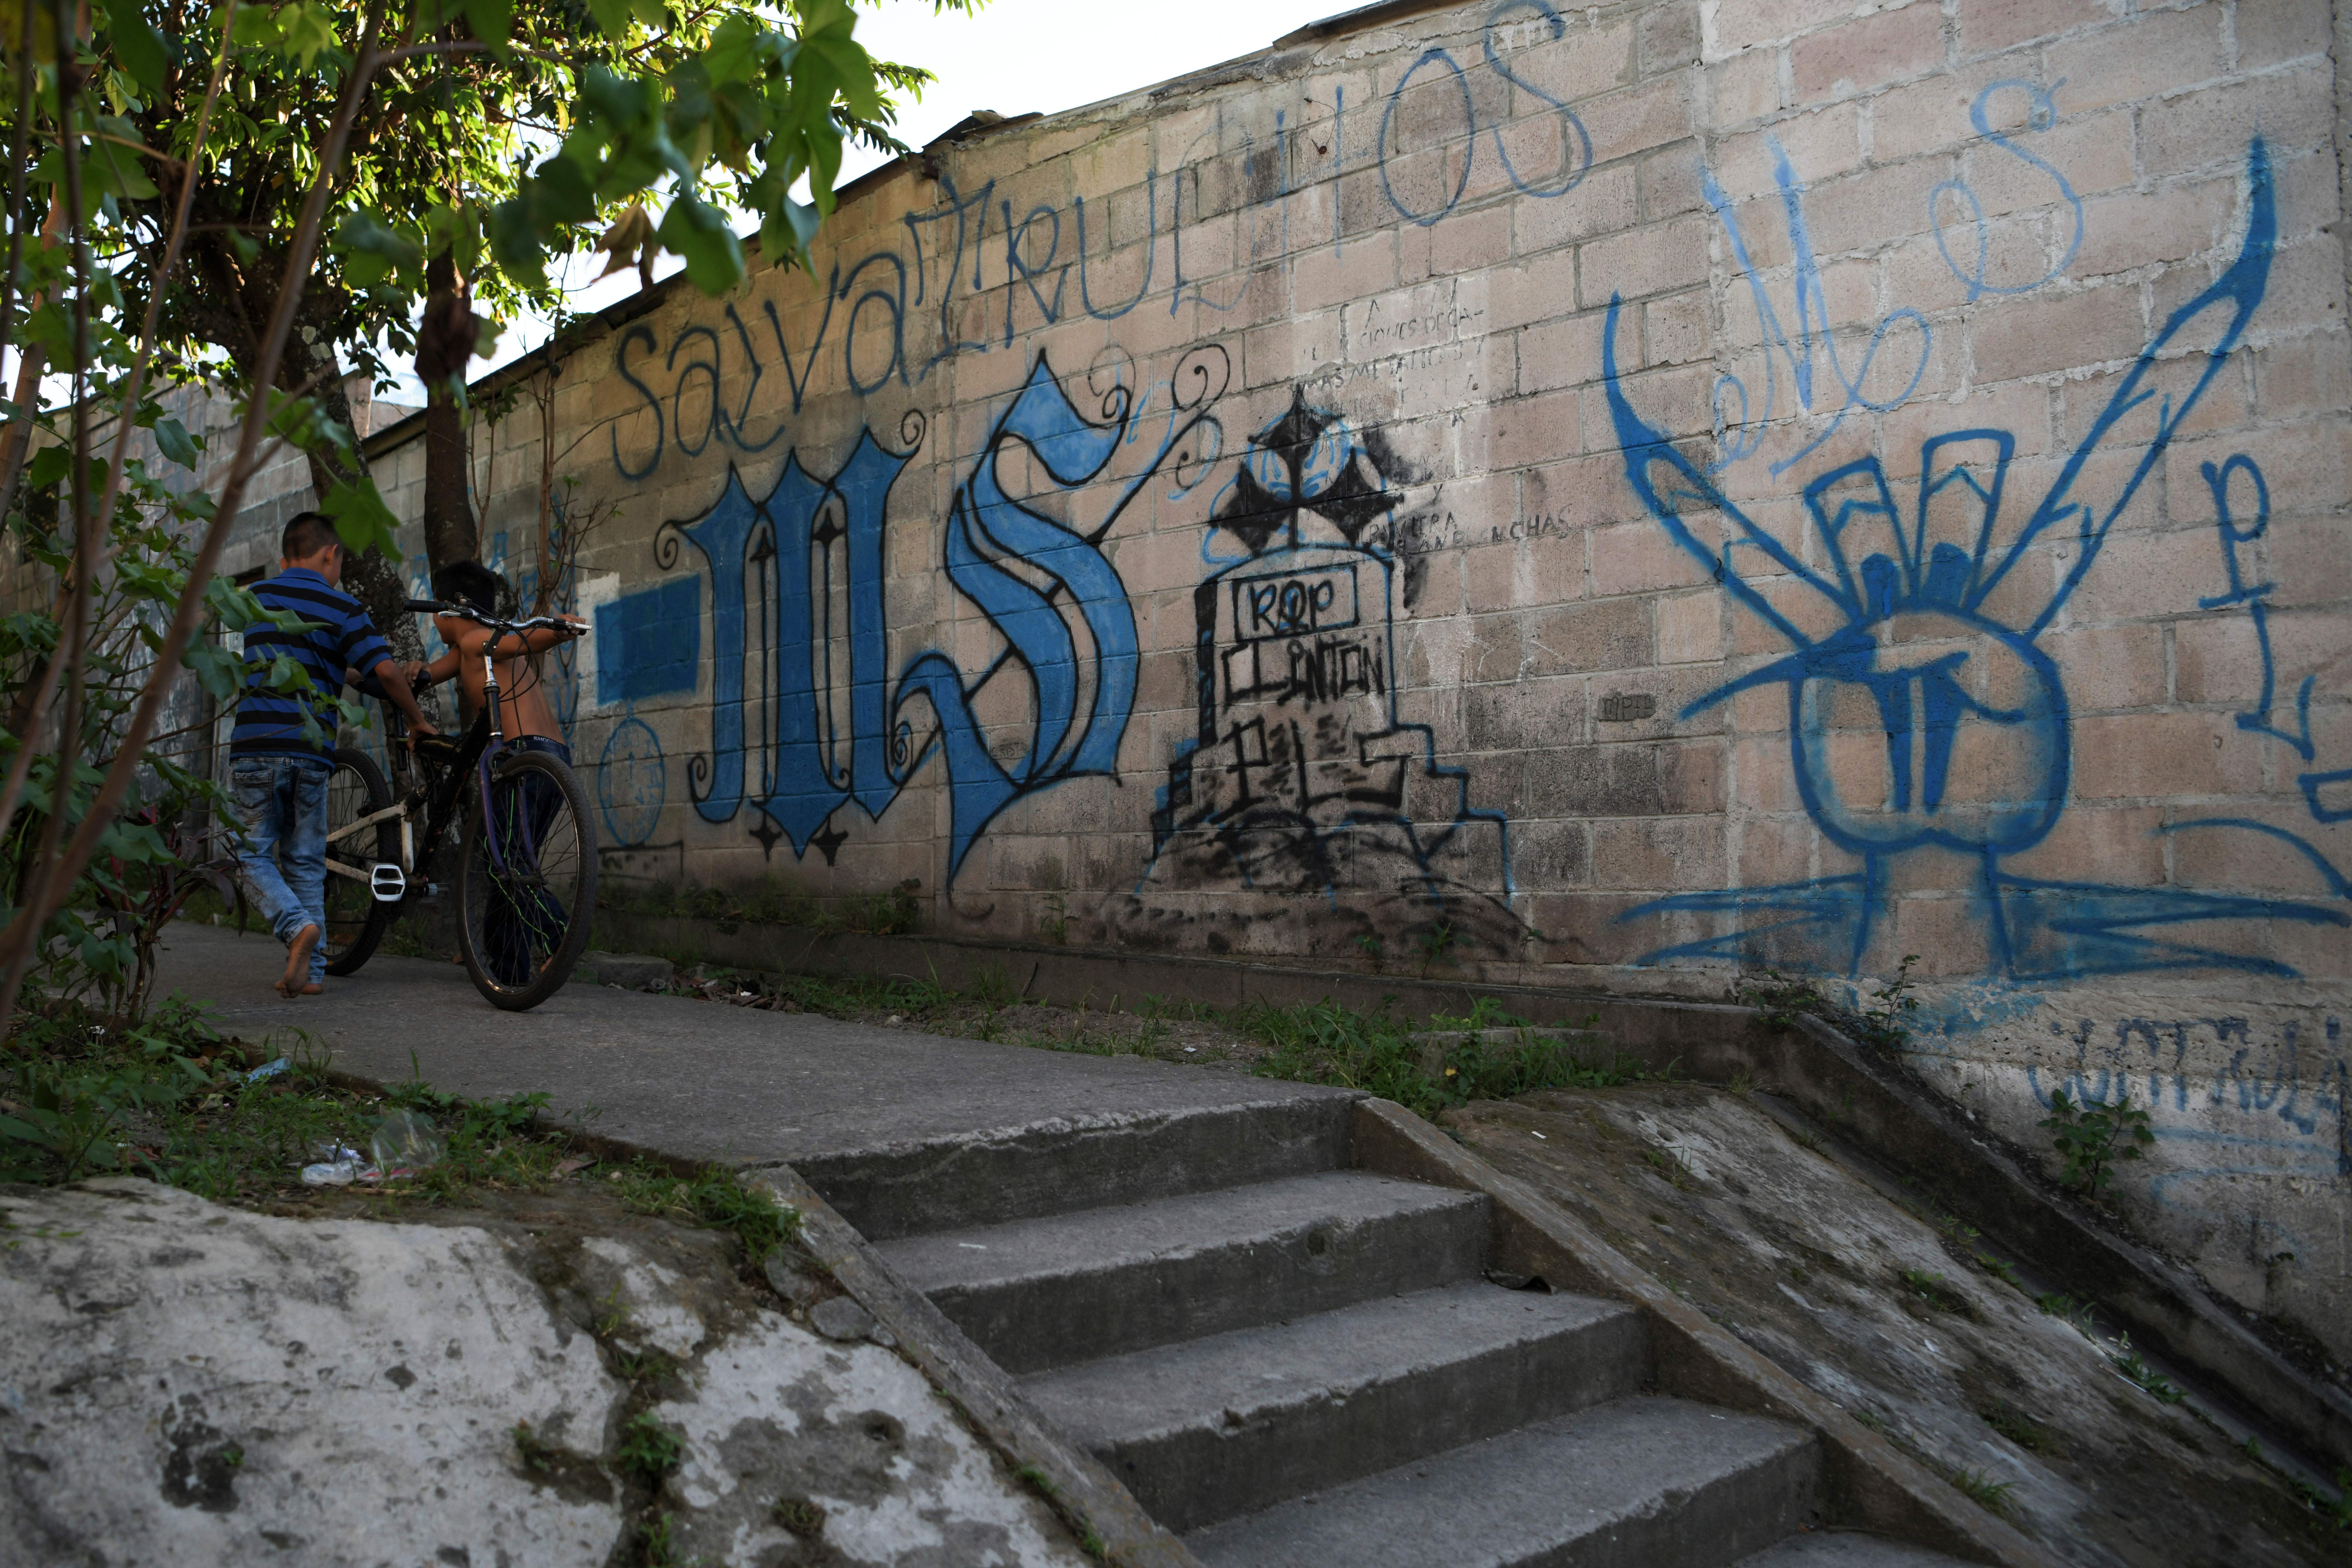 View of a graffiti representative of the MS-13 gang, in the municipality of San Martin, El Salvador, on November 15, 2018. - The mayor of San Jose Guayabal Mauricio Arturo Vilanova is carrying out a joint patrolling operation with soldiers, civilians and the police to prevent gangs from entering his area. MARVIN RECINOS/AFP via Getty Images